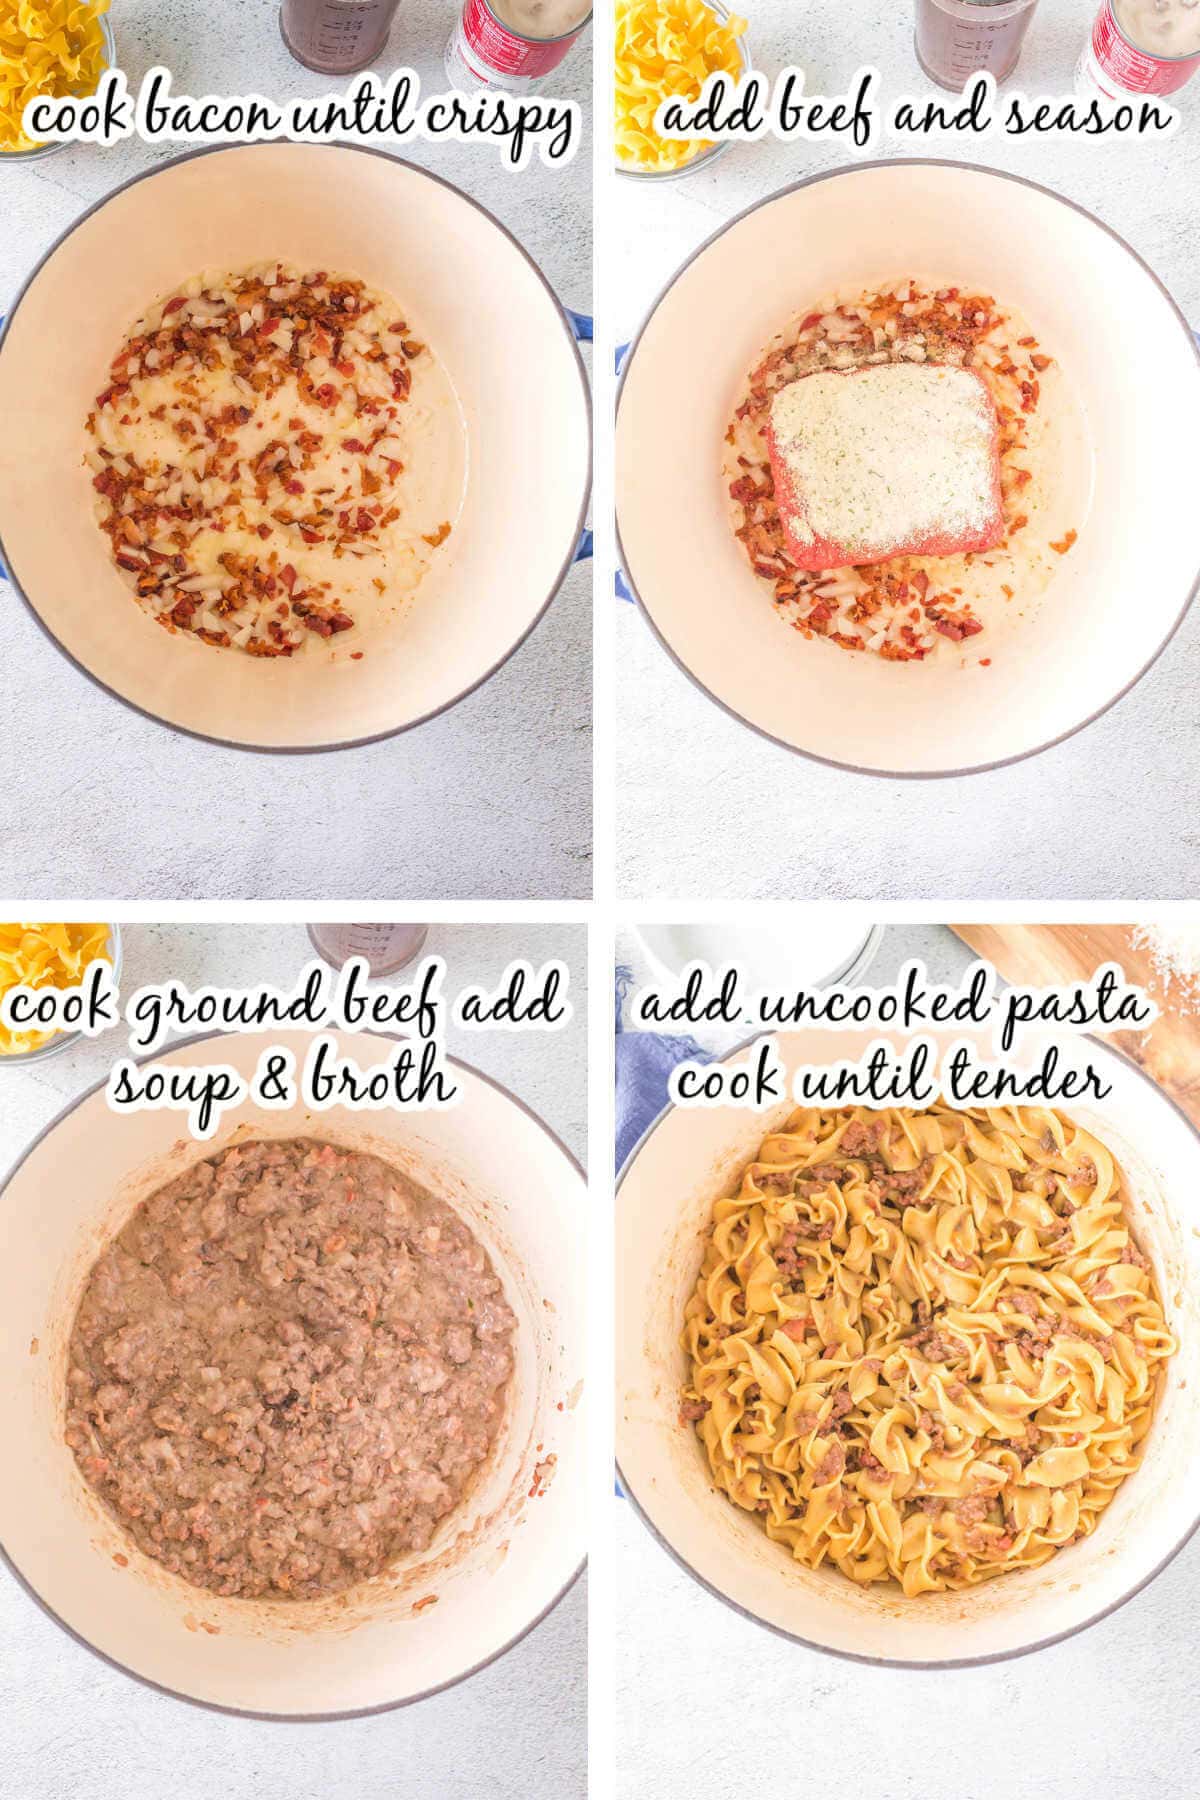 Step by step instructions to make pasta dish. With print overlay.